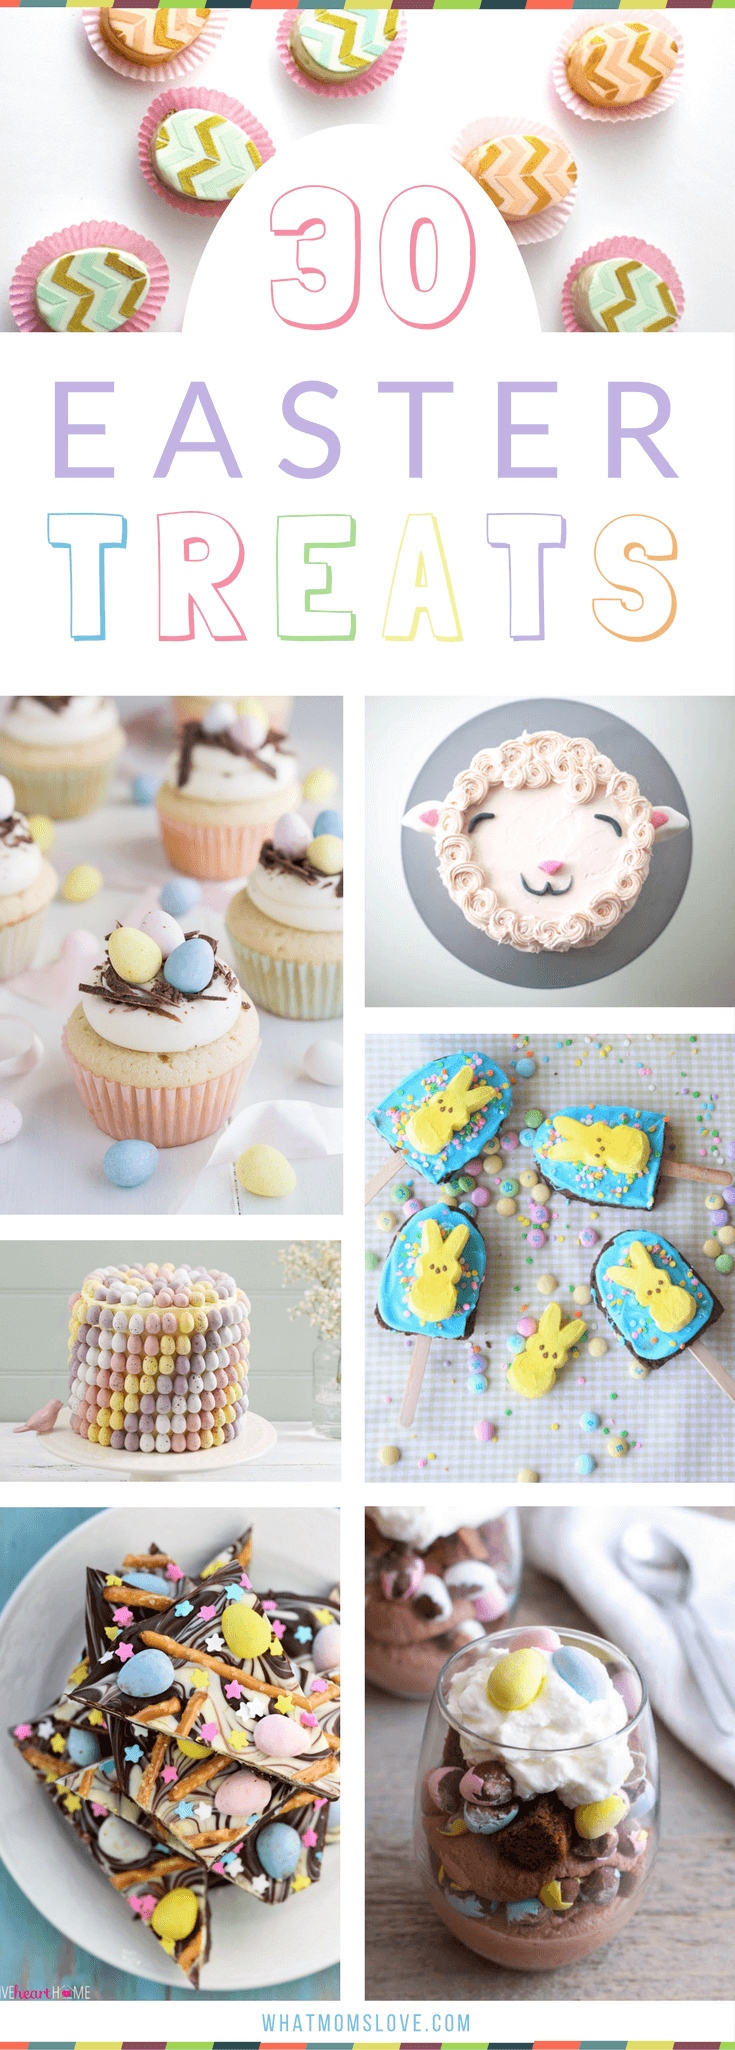 Easter Treat Ideas for Kids | Easy to make sweets that are perfect for your children's school class party or just for fun - super cute yet simple desserts - including cakes, bark, brownies, peeps, bunnies, lambs, mini eggs, rice krispies and more!